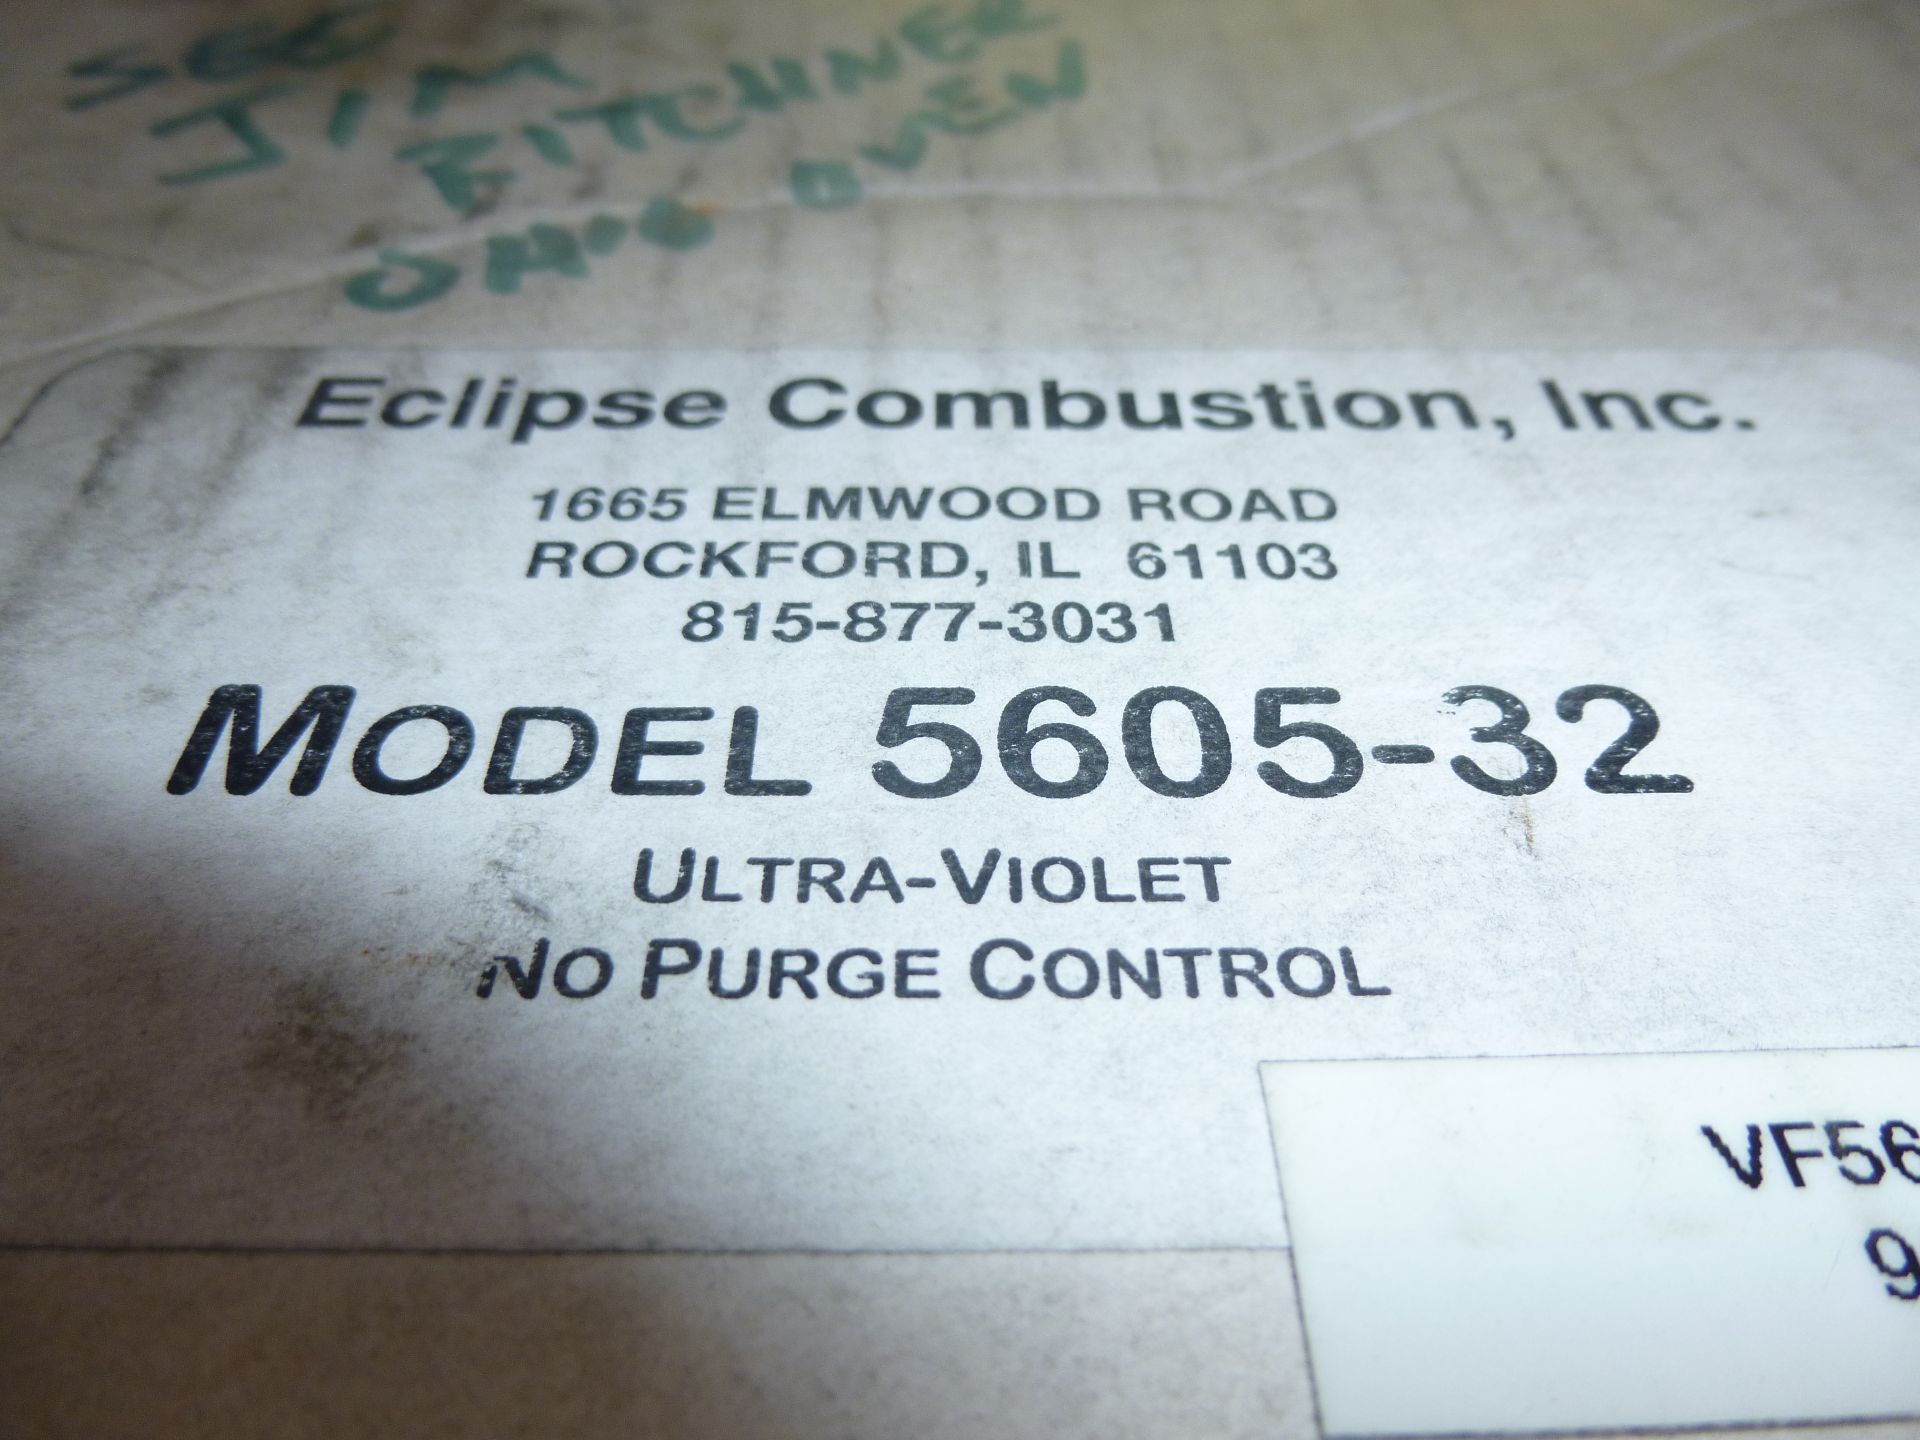 Eclipse Production Veri-Flame Mode 5605-32 ultra-violet, new in box, as always with Brolyn LLC - Image 2 of 2